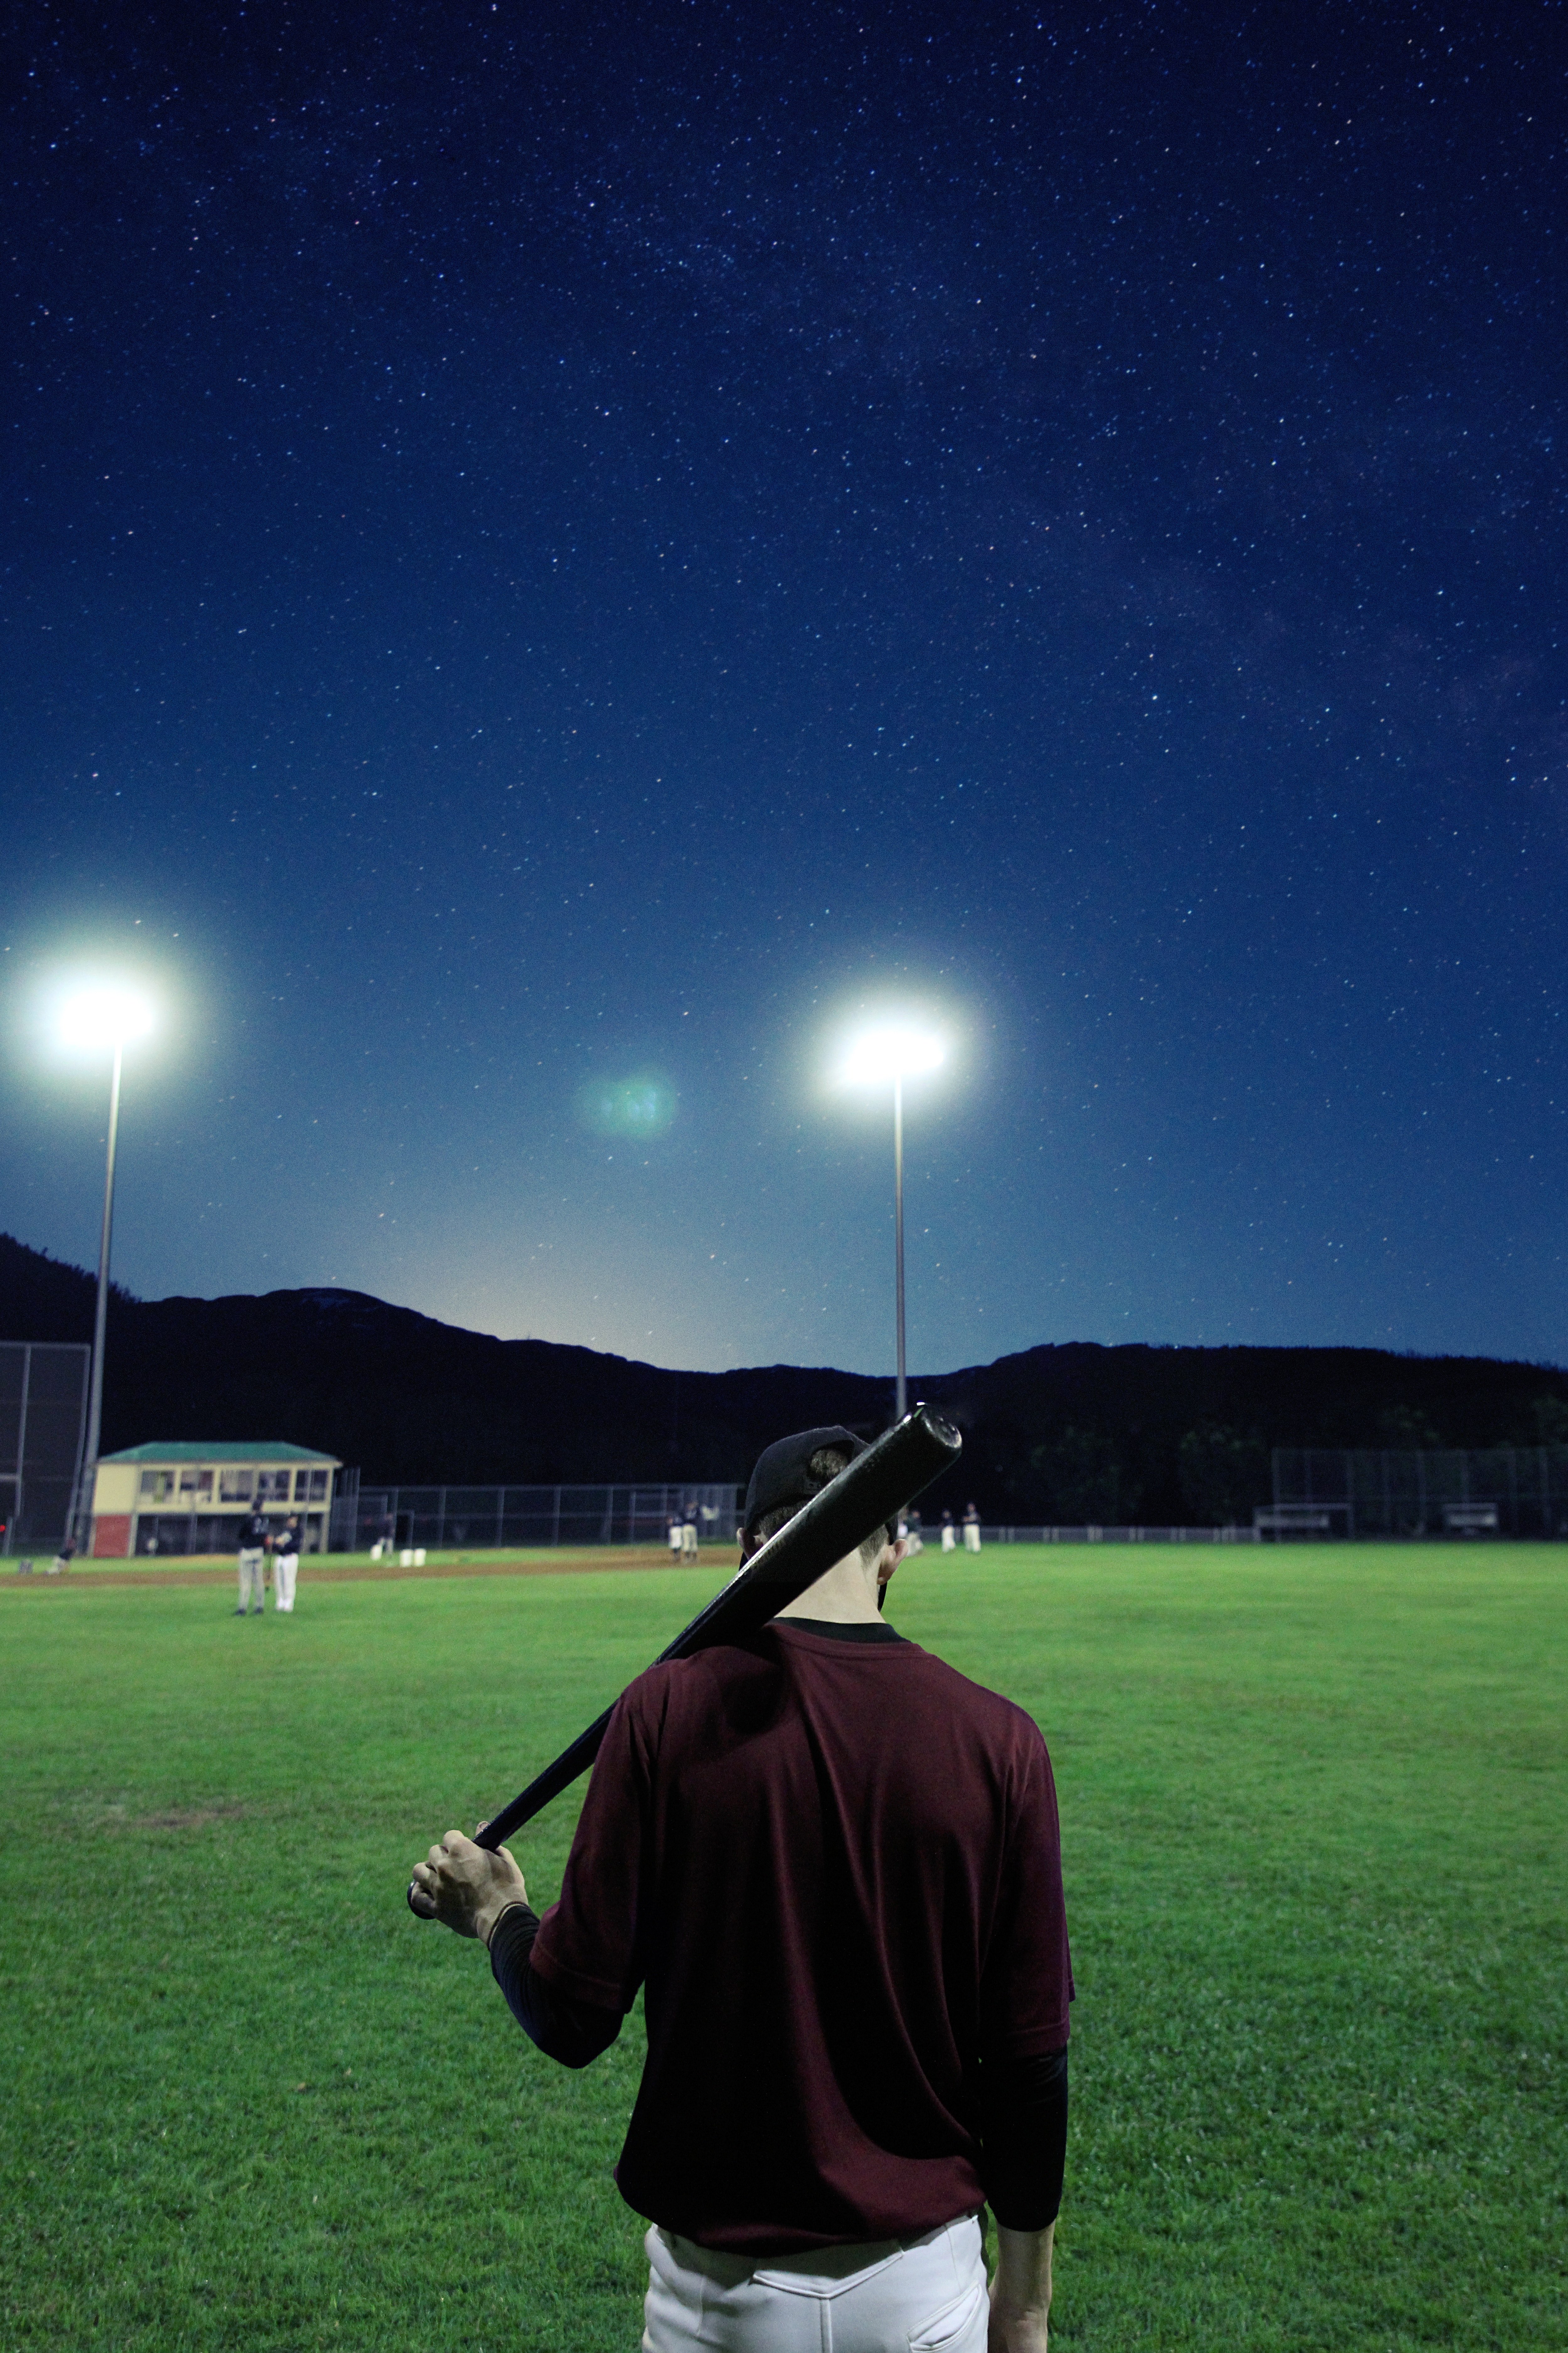 Pitch Perfect: How to Throw Content Marketing Home Runs